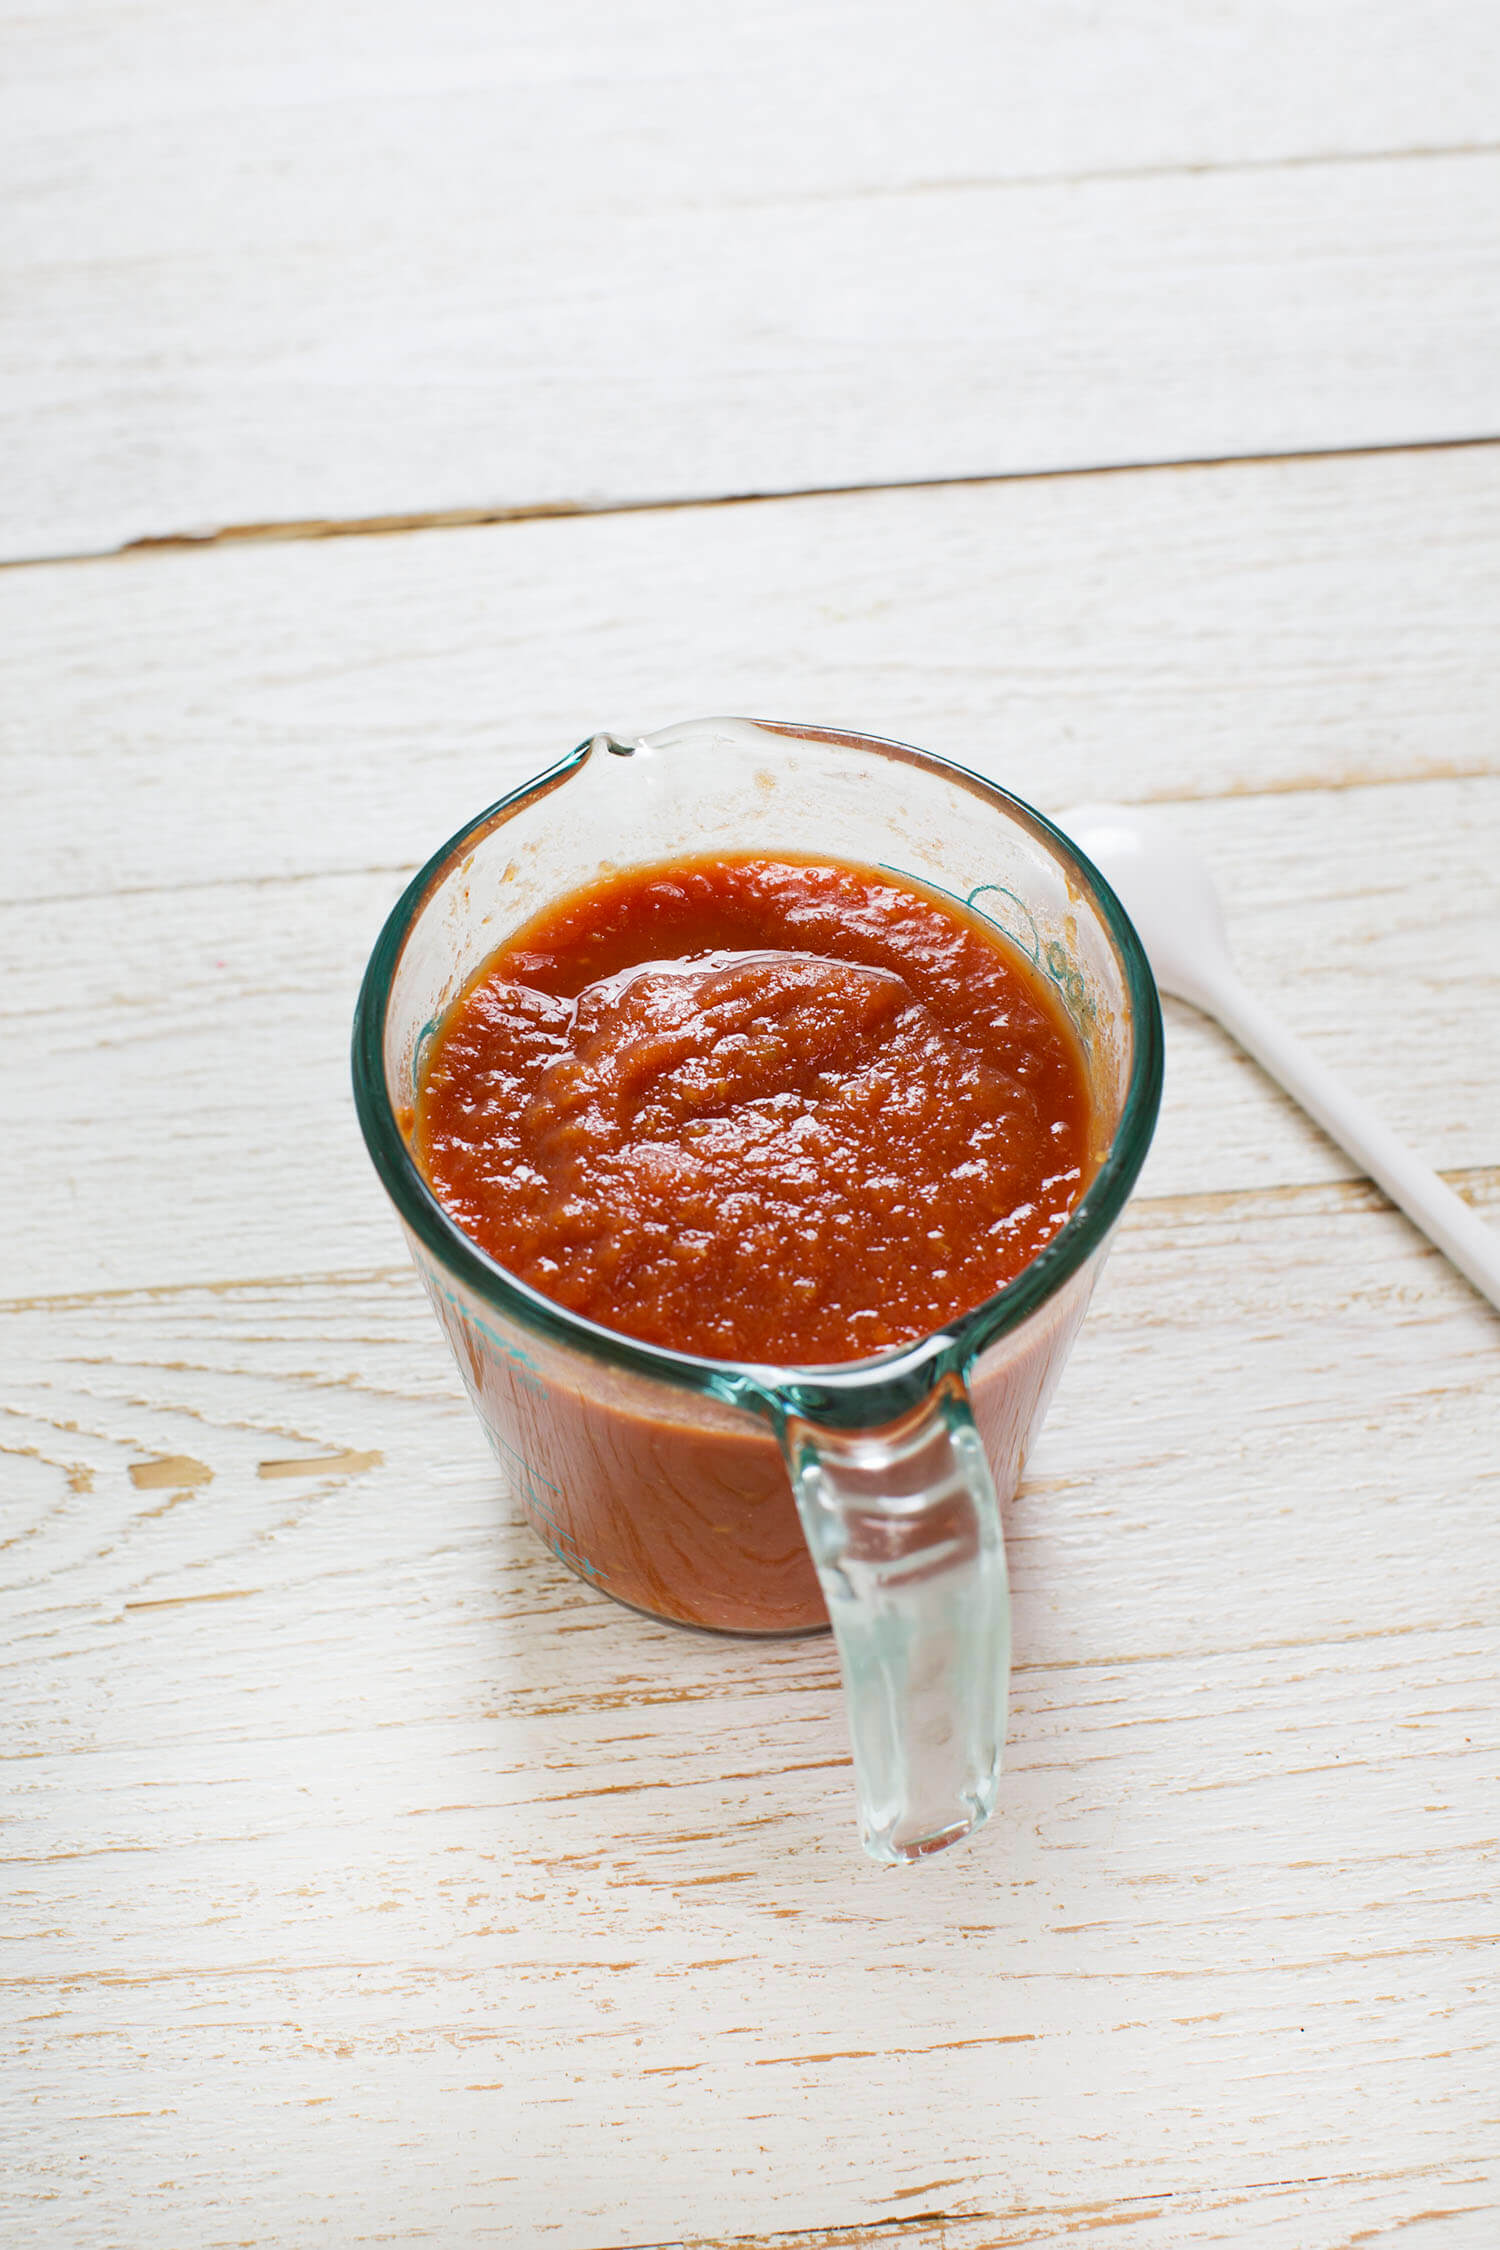 How to make tomato sauce from fresh tomatoes